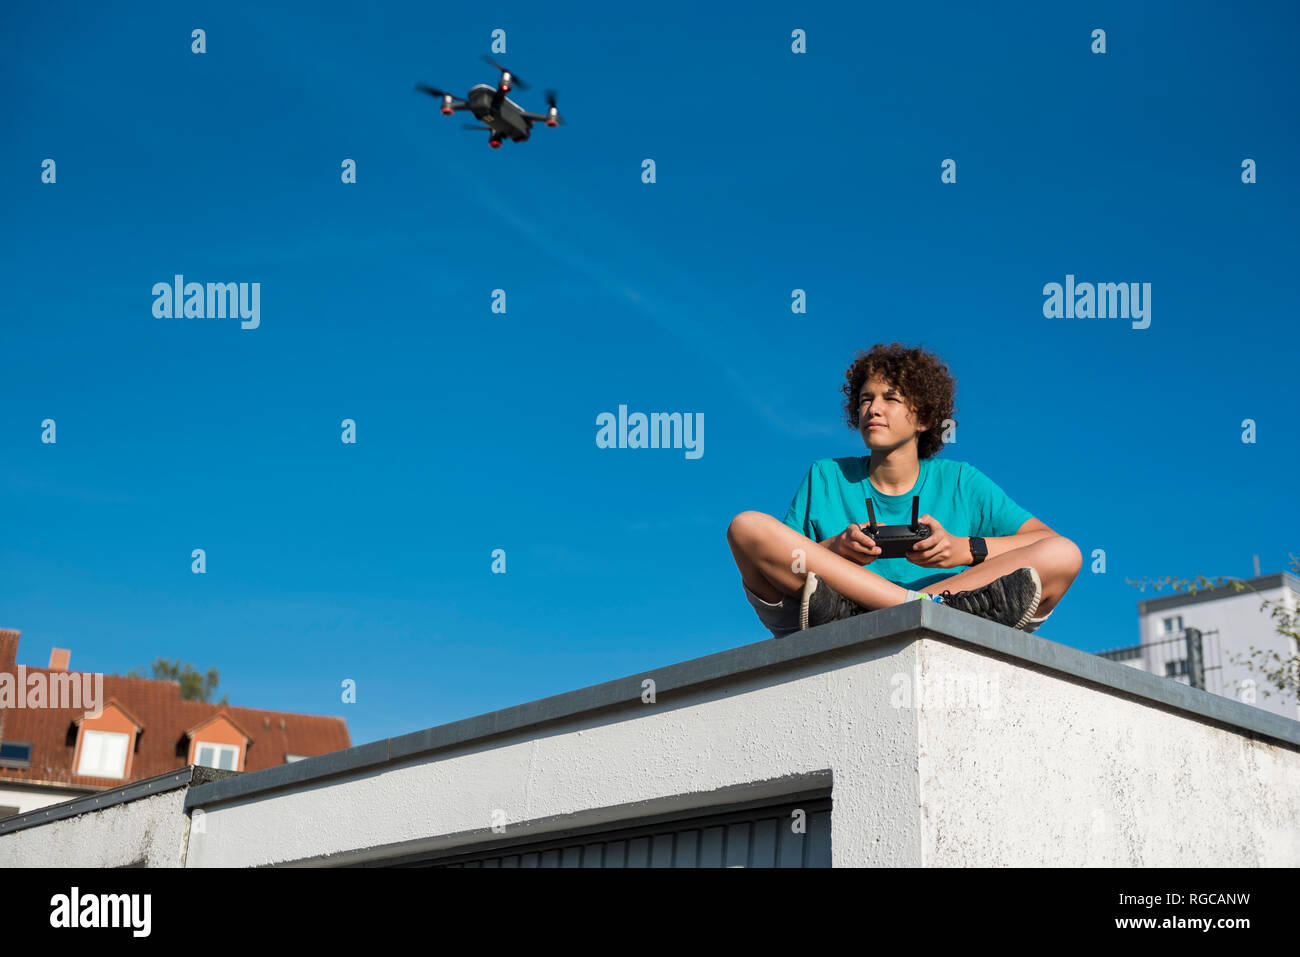 Boy navigating a flying drone, sitting on garage roof Stock Photo